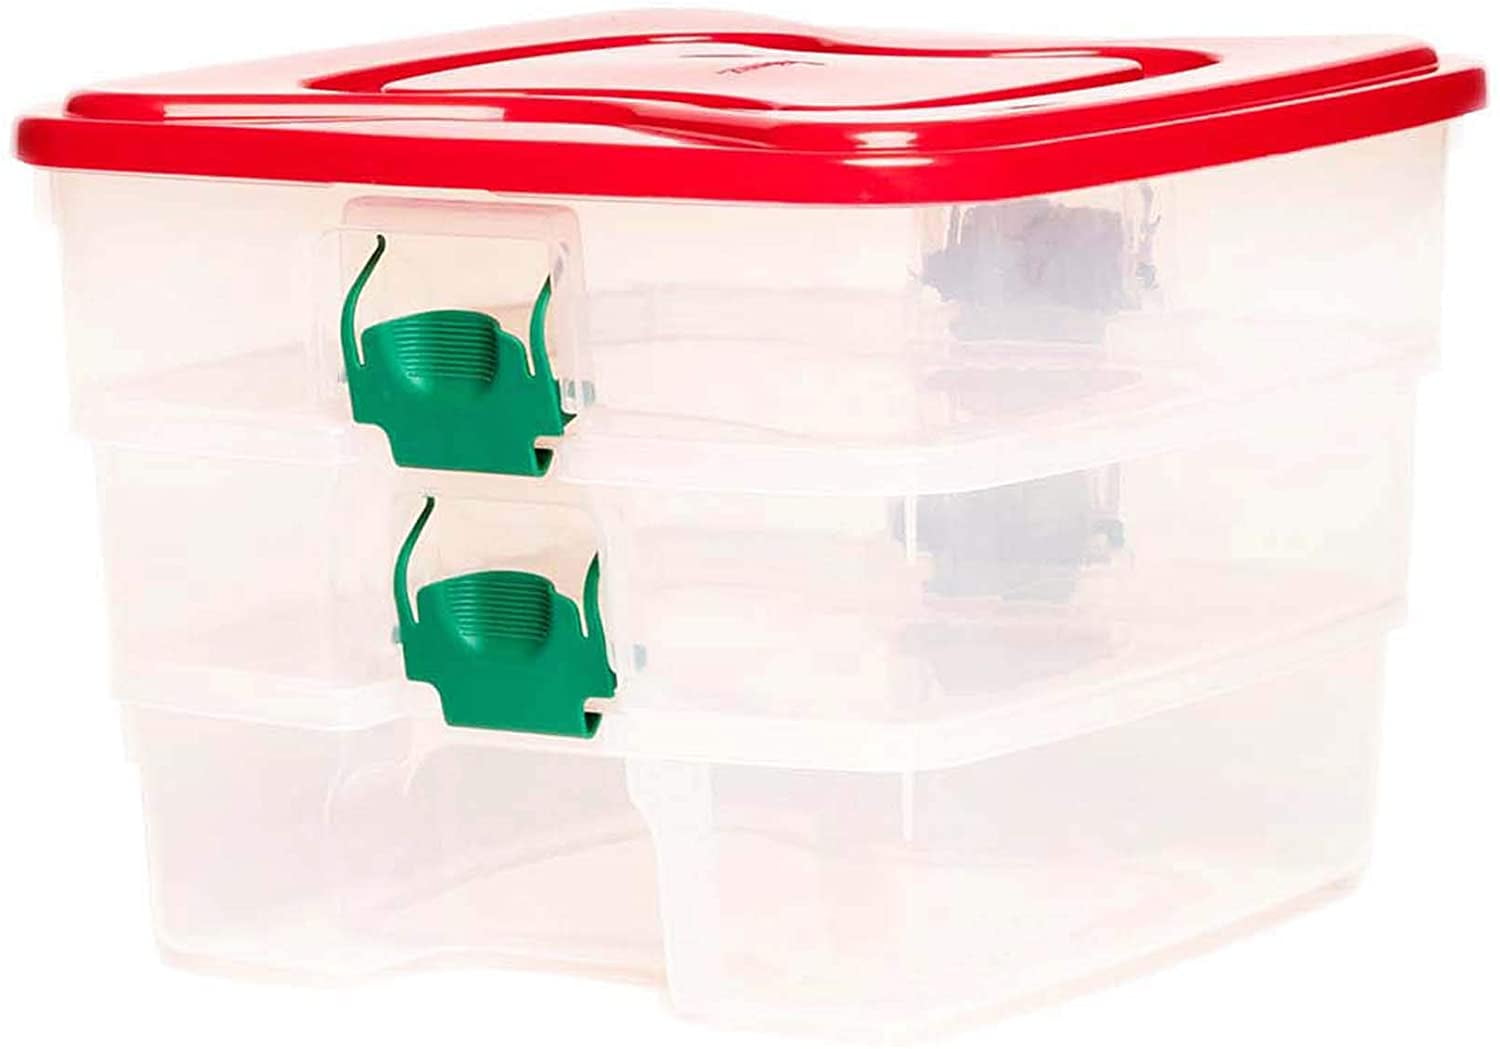 3 Pack for sale online Homz 6710HDRDDC.03 Garland Container